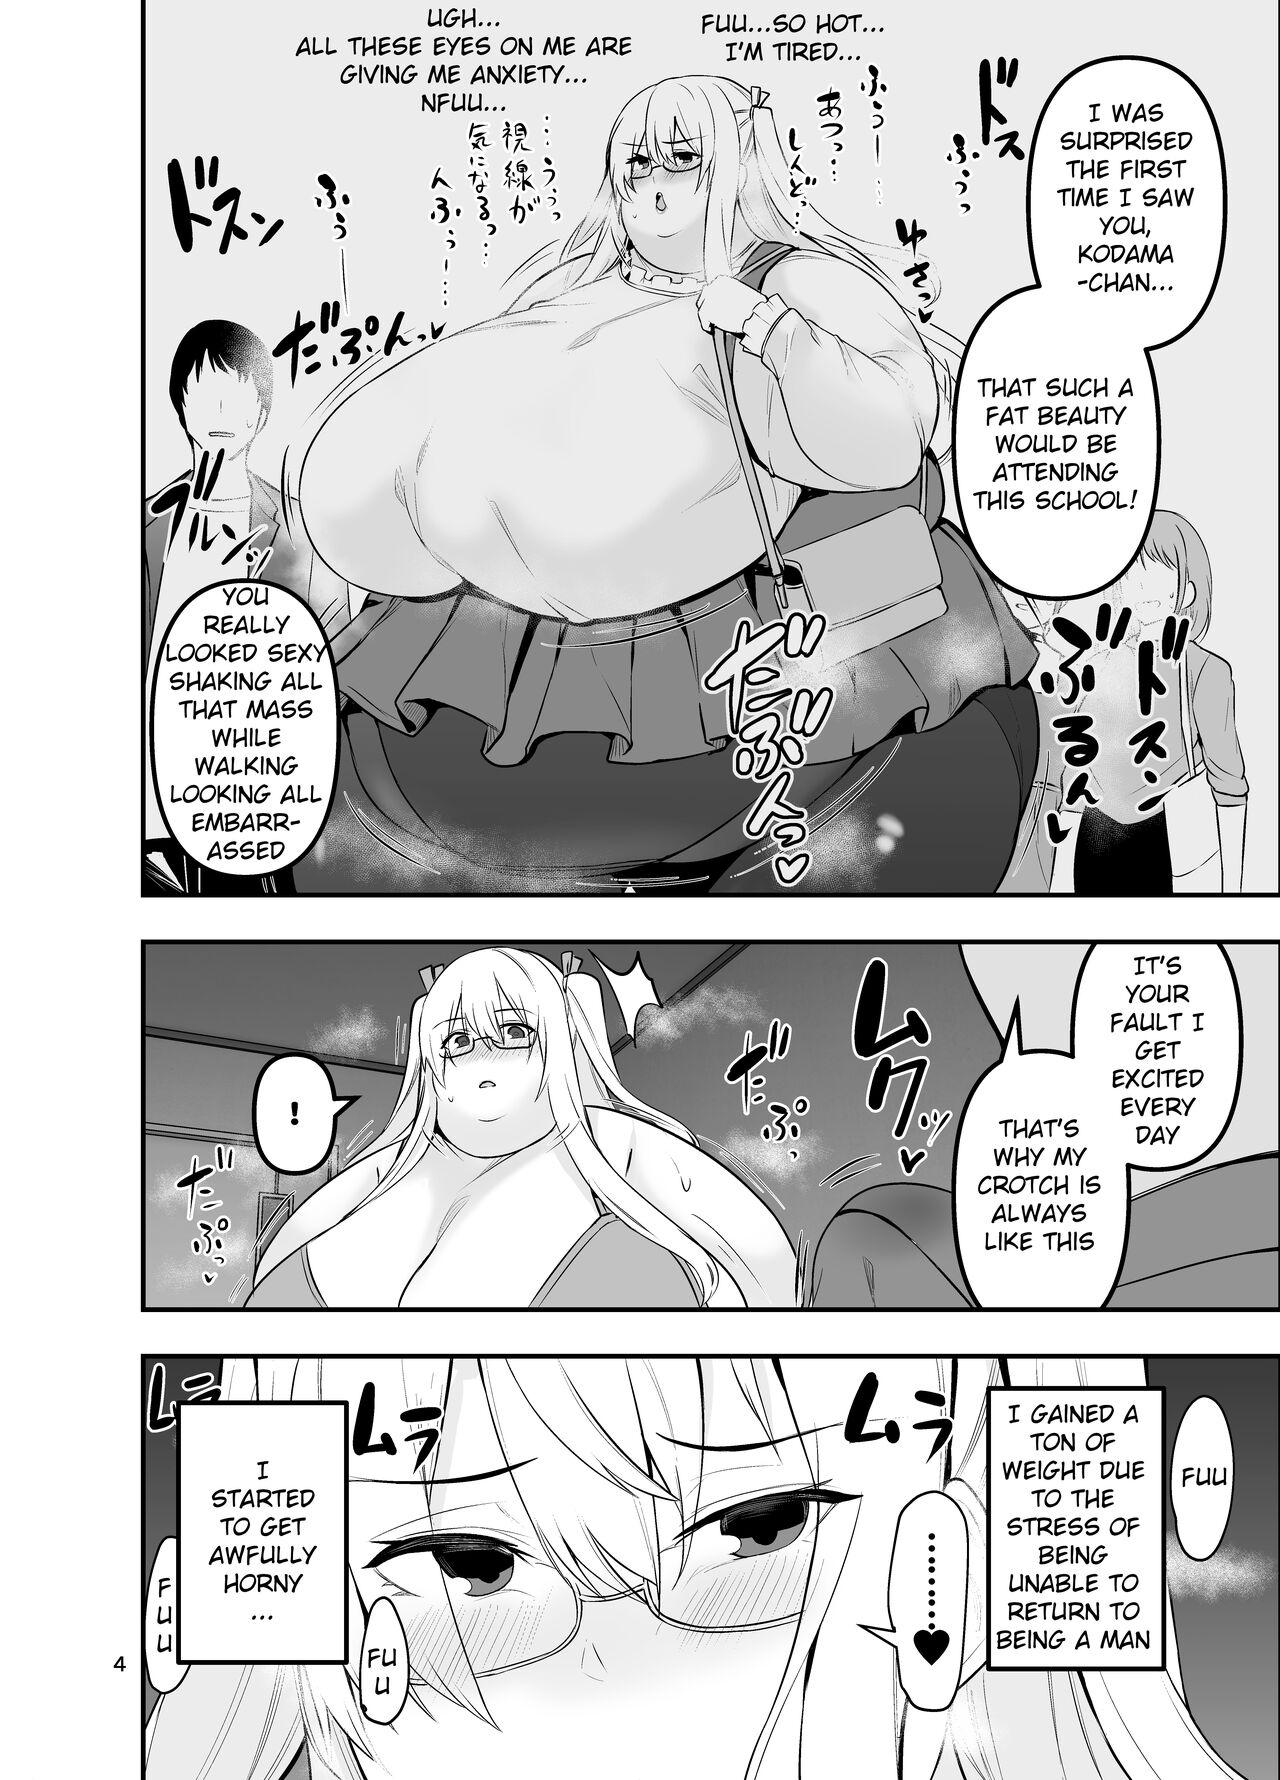 Big Penis Triple digit weight Kodama-chan and H! Face - Page 4